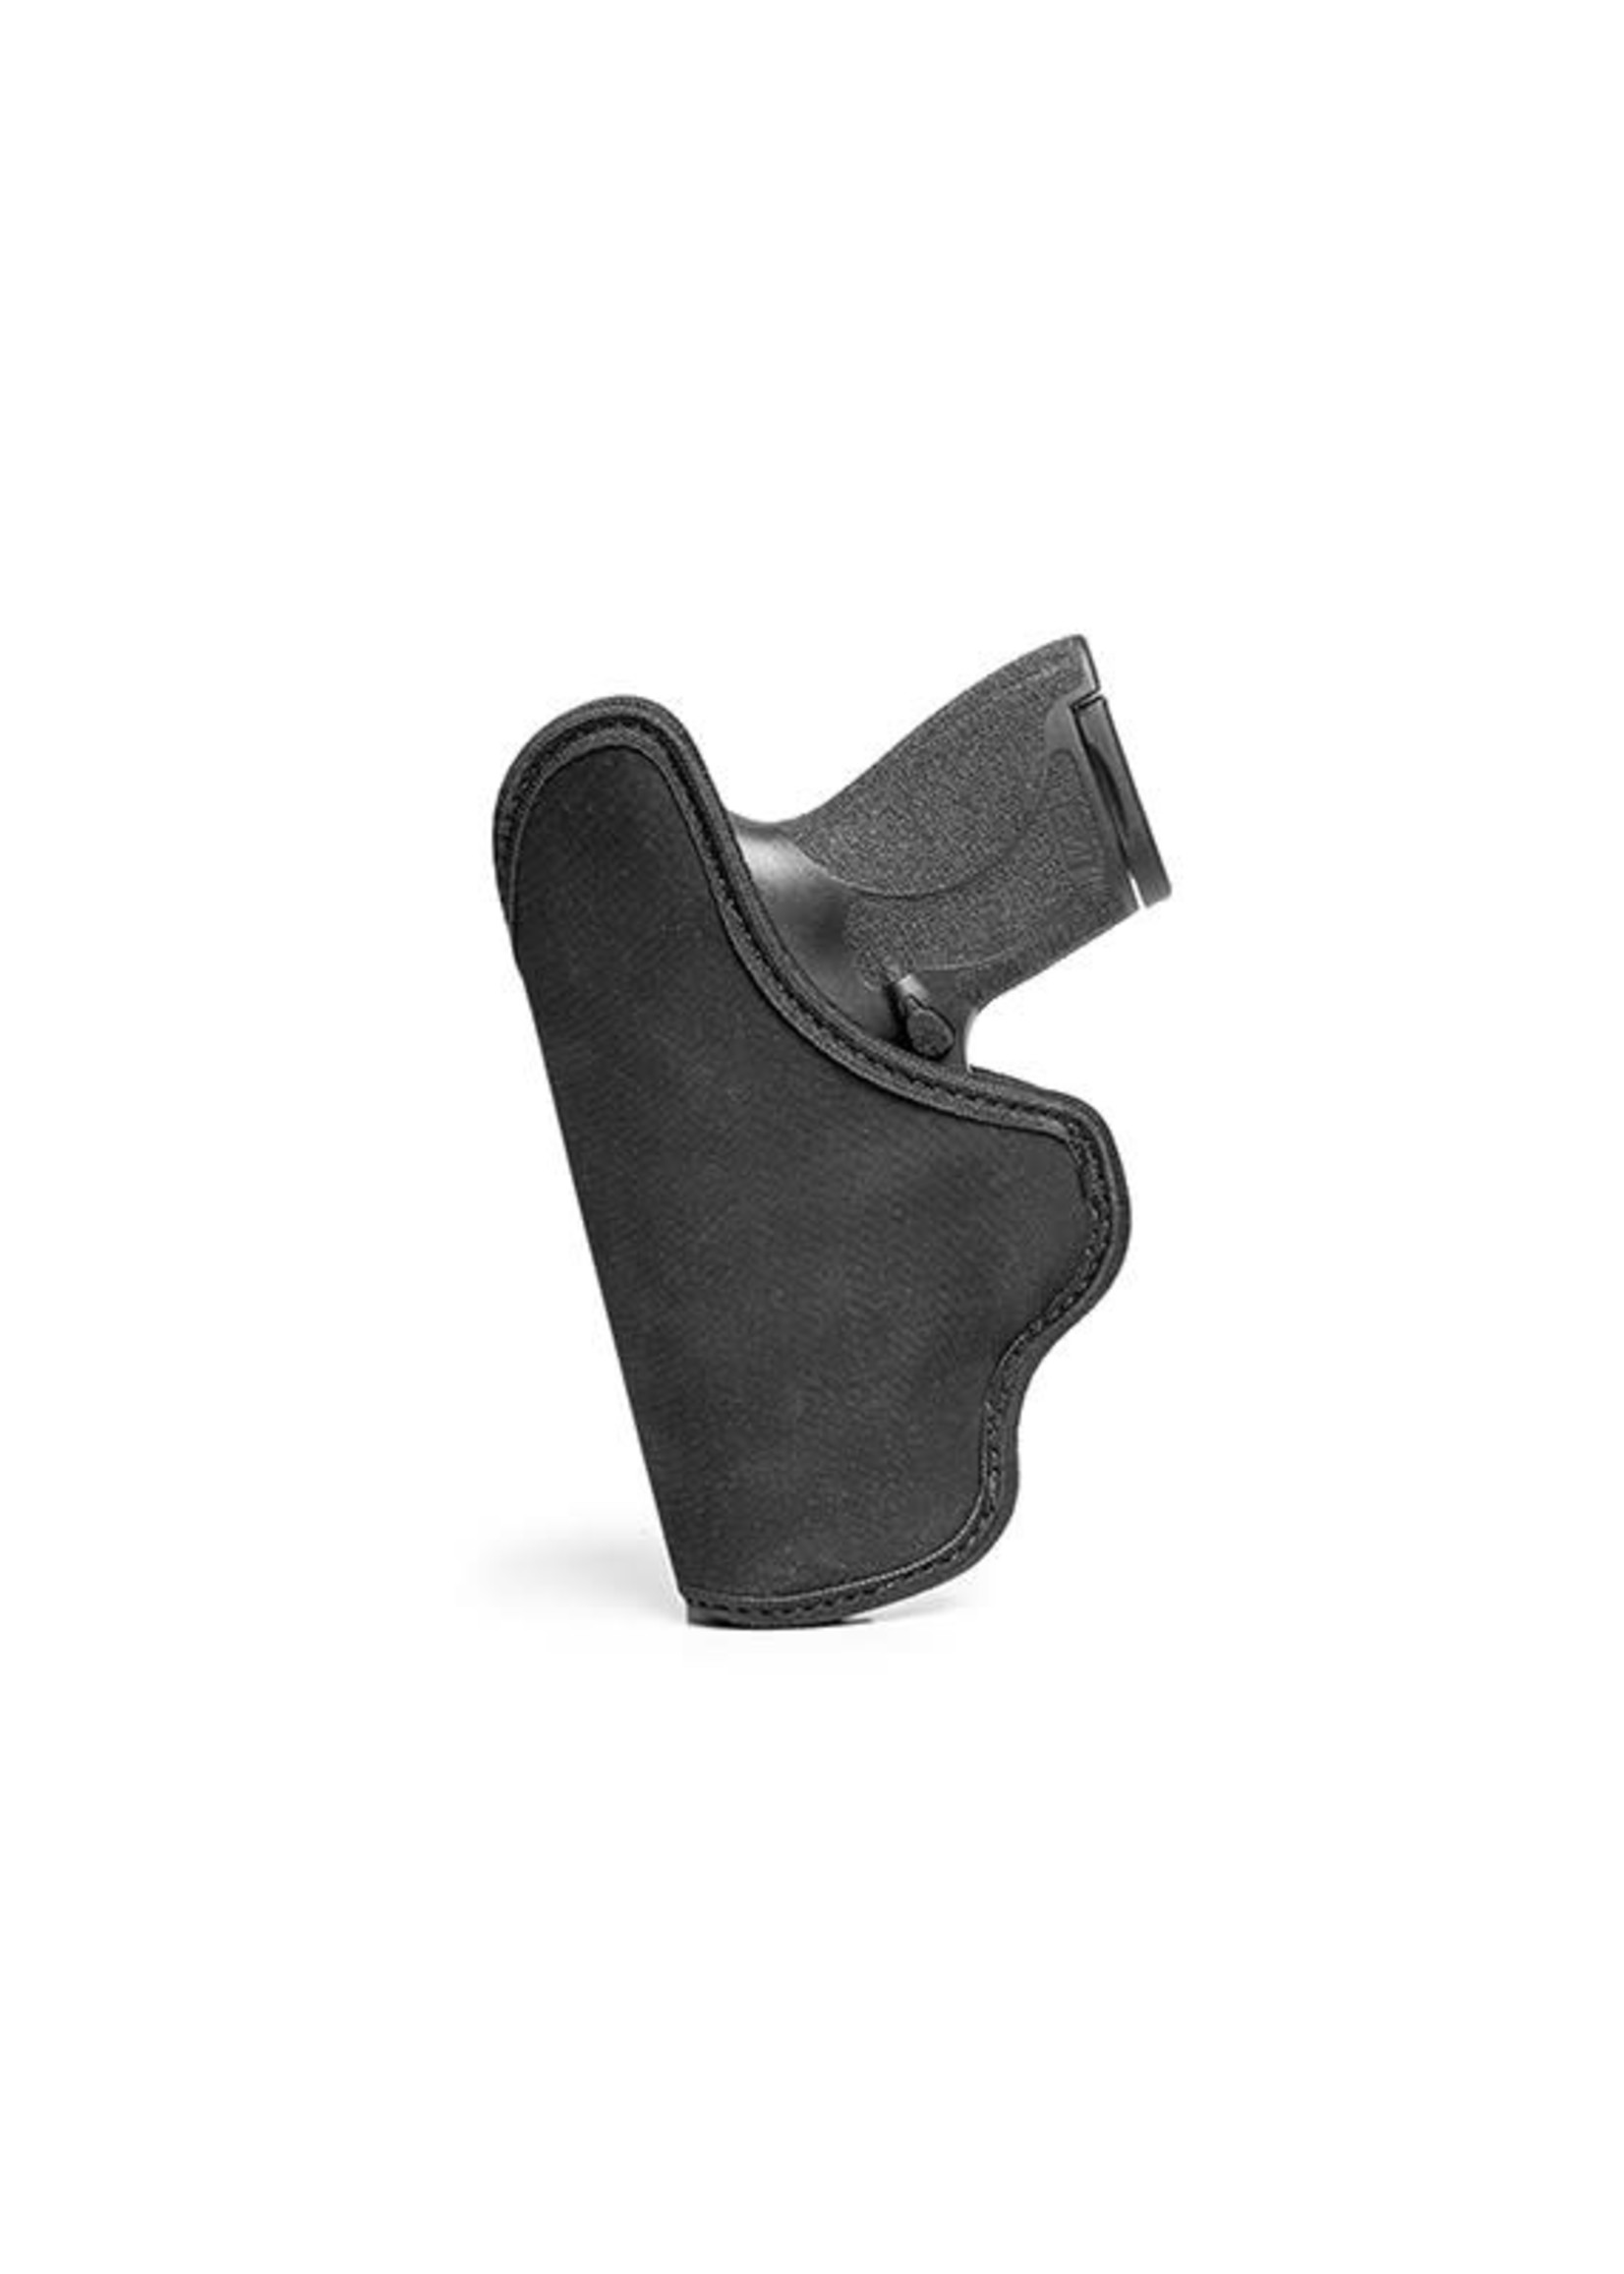 Alien Gear Holsters CLEARANCE  Alien Gear Grip Tuck Universal Holster - Compact, LH, Double Stack